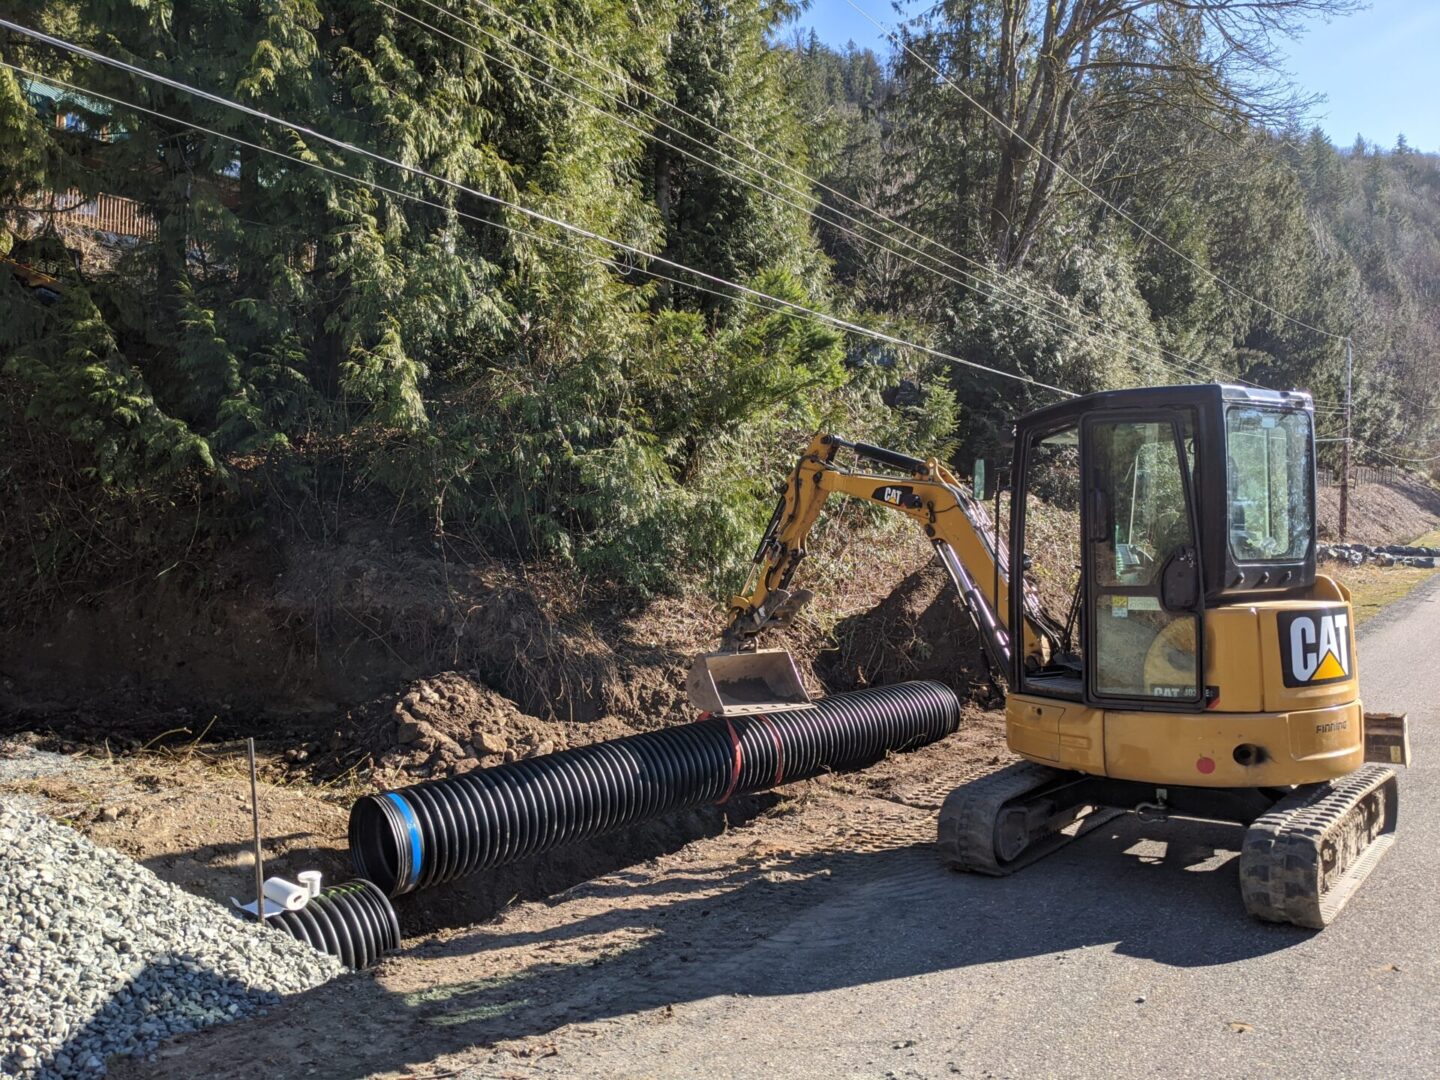 A yellow excavator installing large black drainage pipes beside a road, with a pile of gravel nearby and a forested hill in the background.